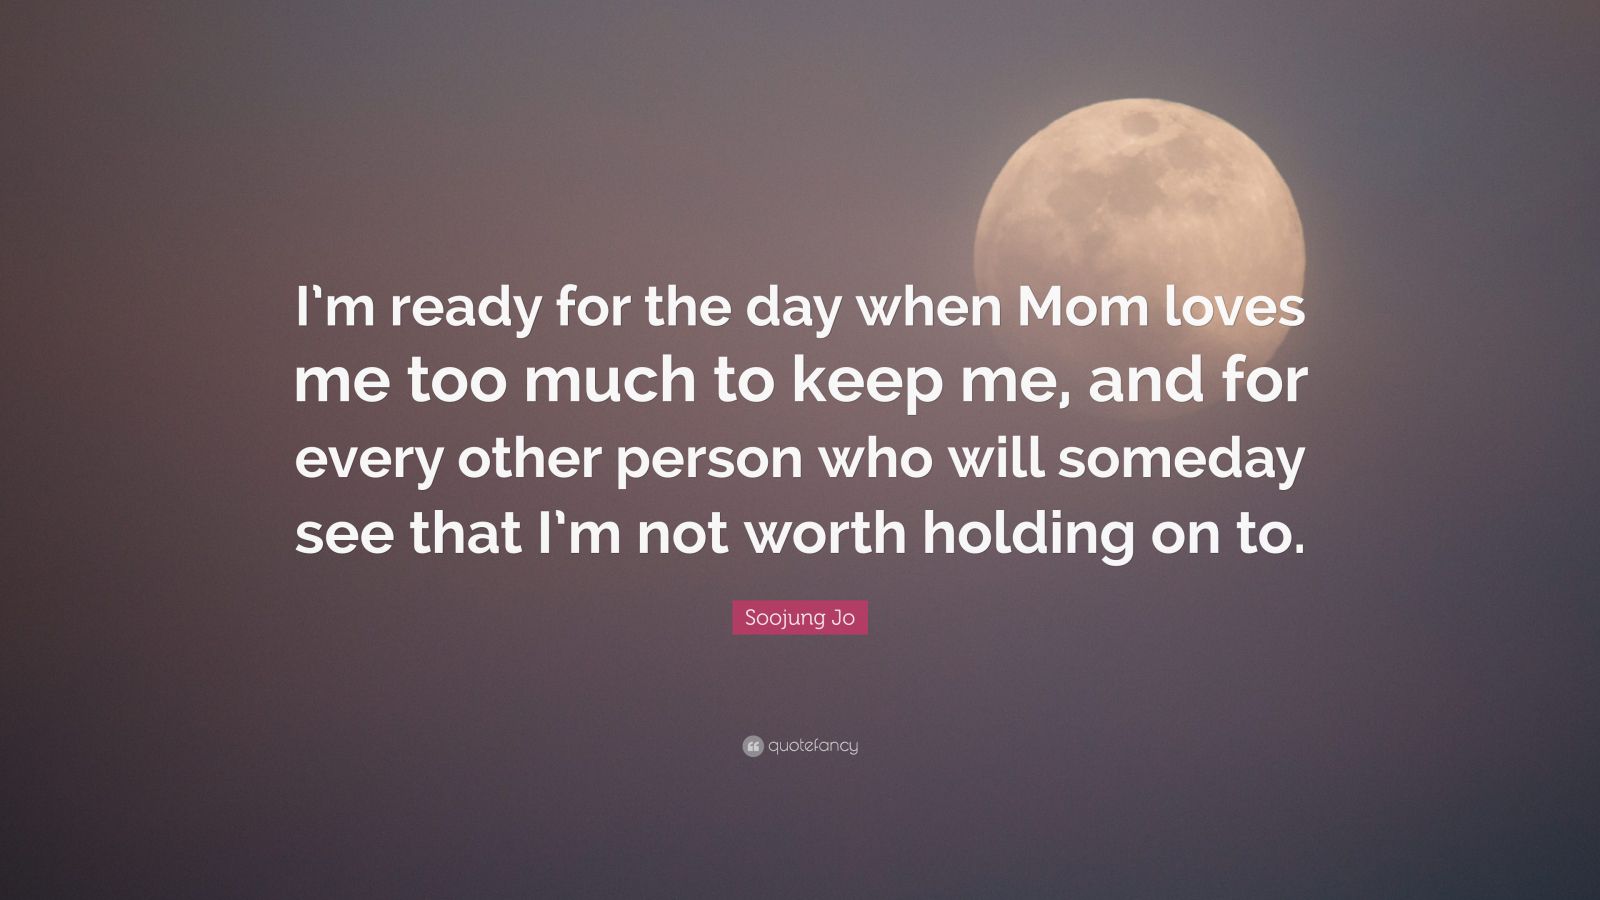 https://quotefancy.com/media/wallpaper/1600x900/6984945-Soojung-Jo-Quote-I-m-ready-for-the-day-when-Mom-loves-me-too-much.jpg